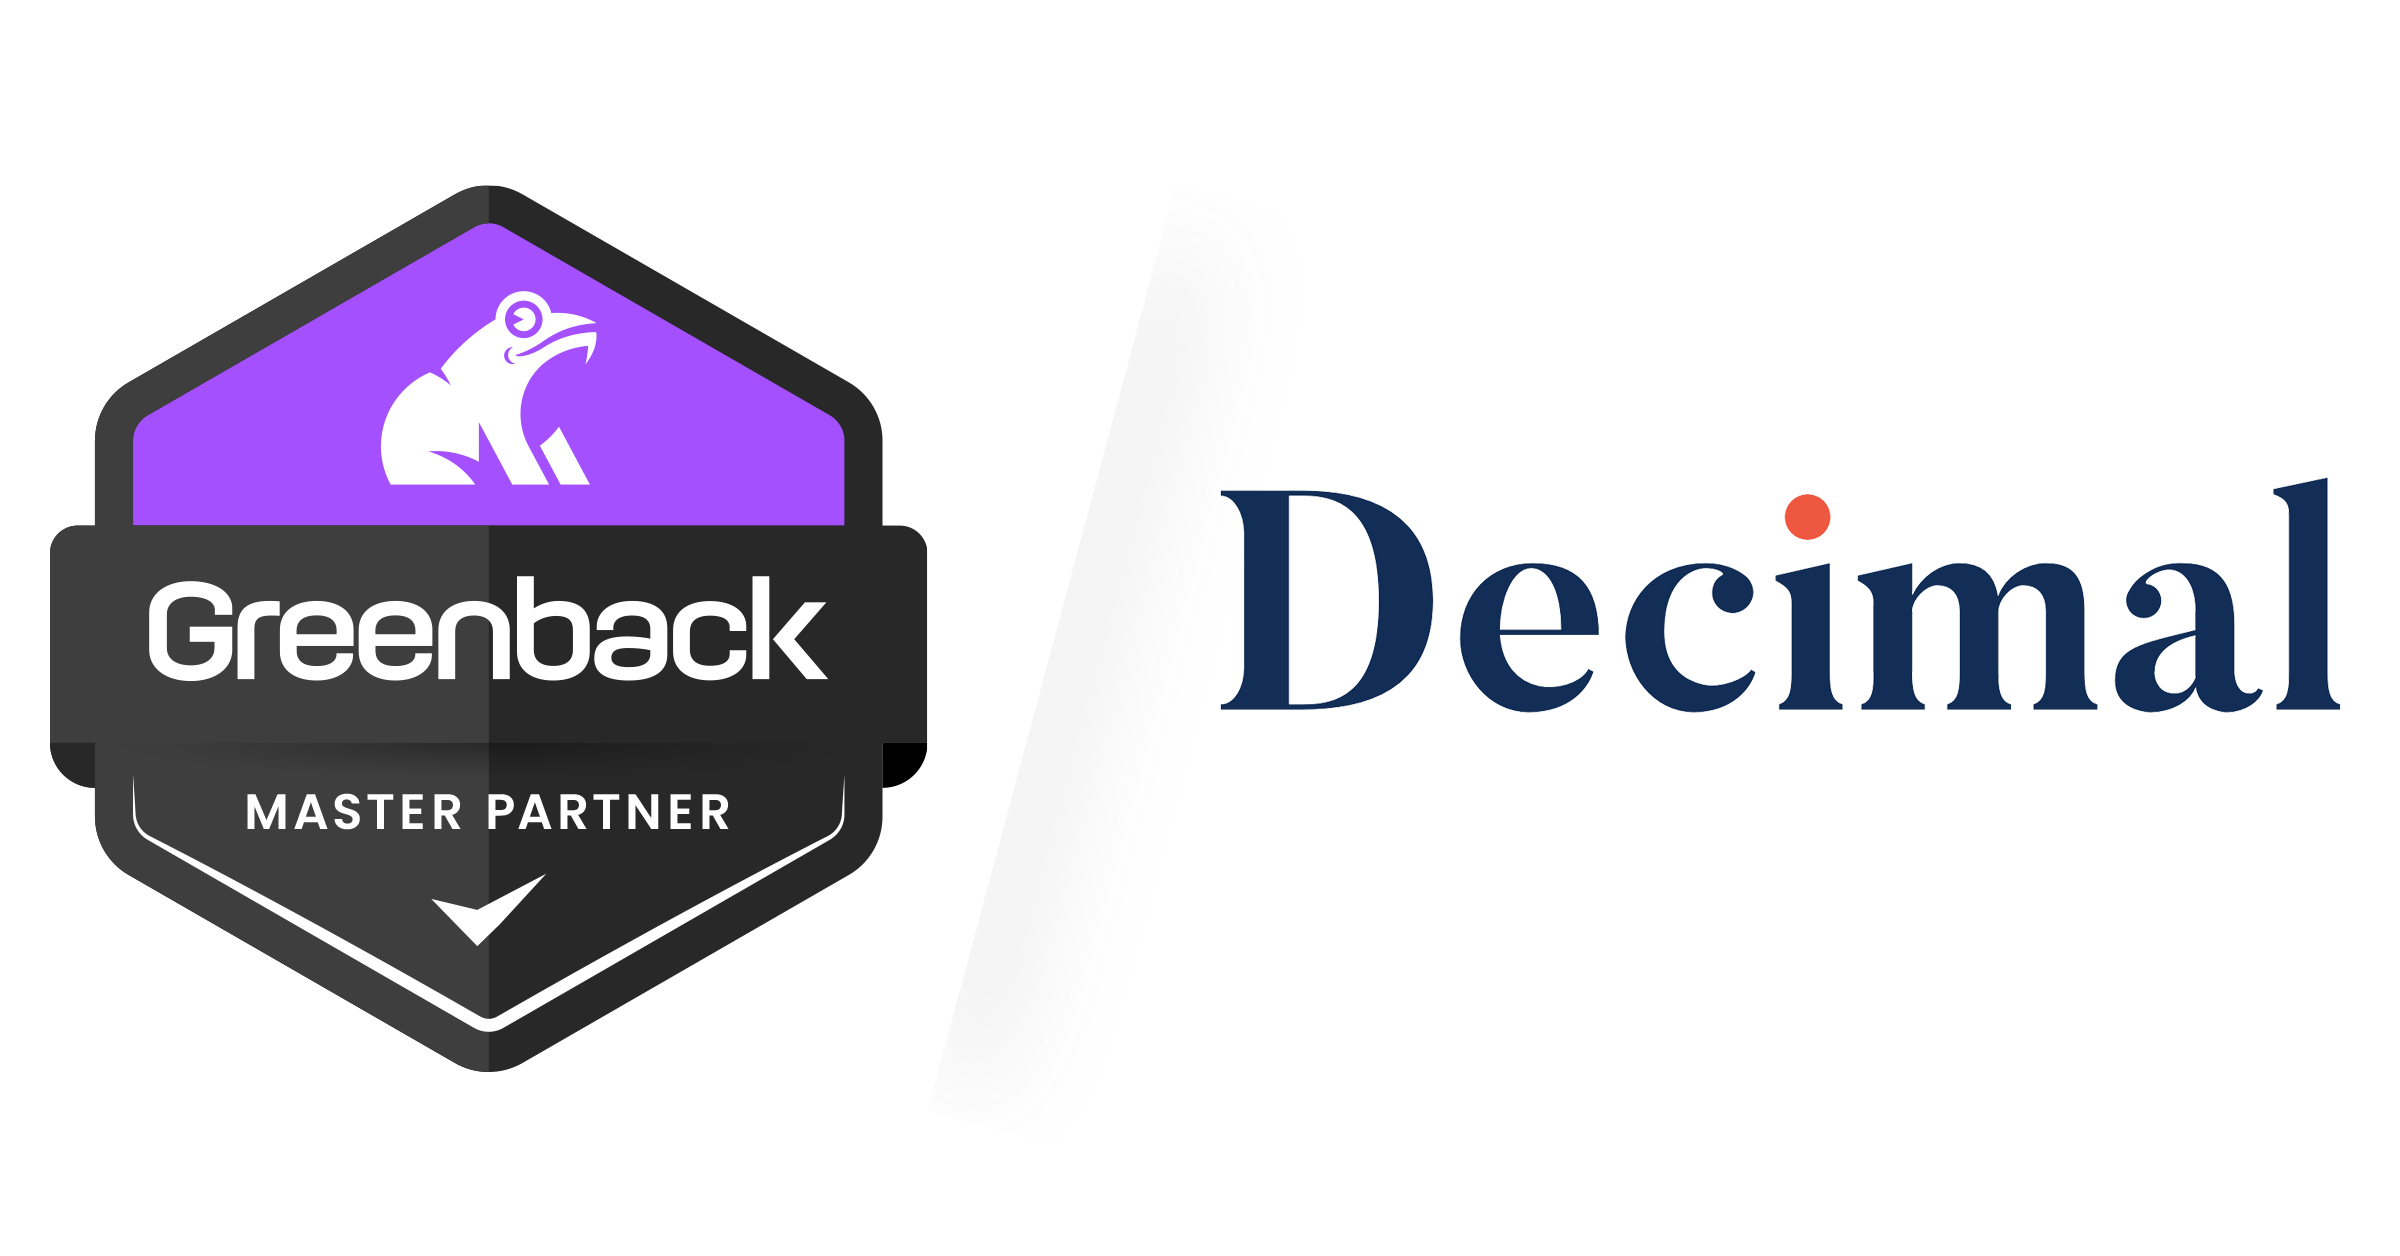 Greenback Announces Decimal as First “Greenback for Pros” Master Partner